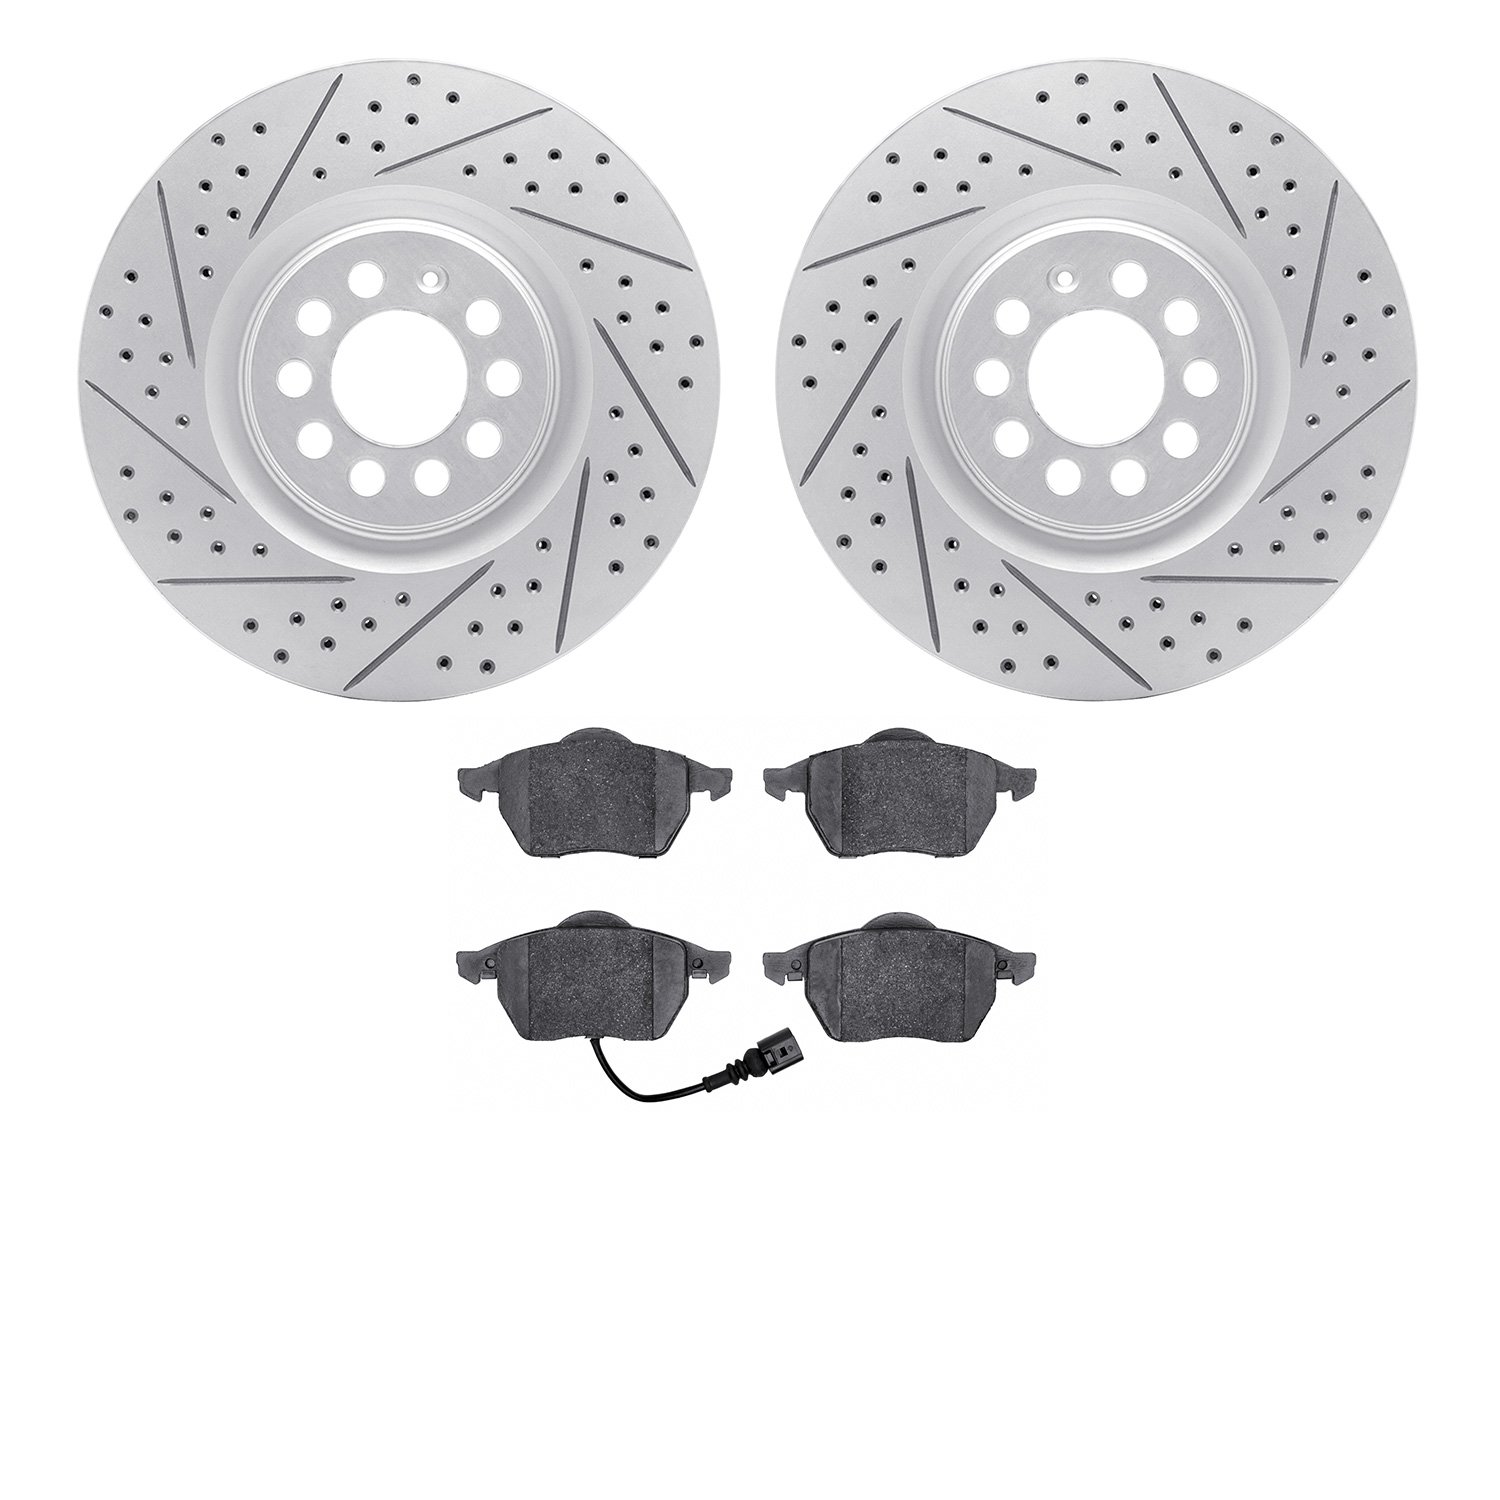 2502-74027 Geoperformance Drilled/Slotted Rotors w/5000 Advanced Brake Pads Kit, 2000-2006 Audi/Volkswagen, Position: Front